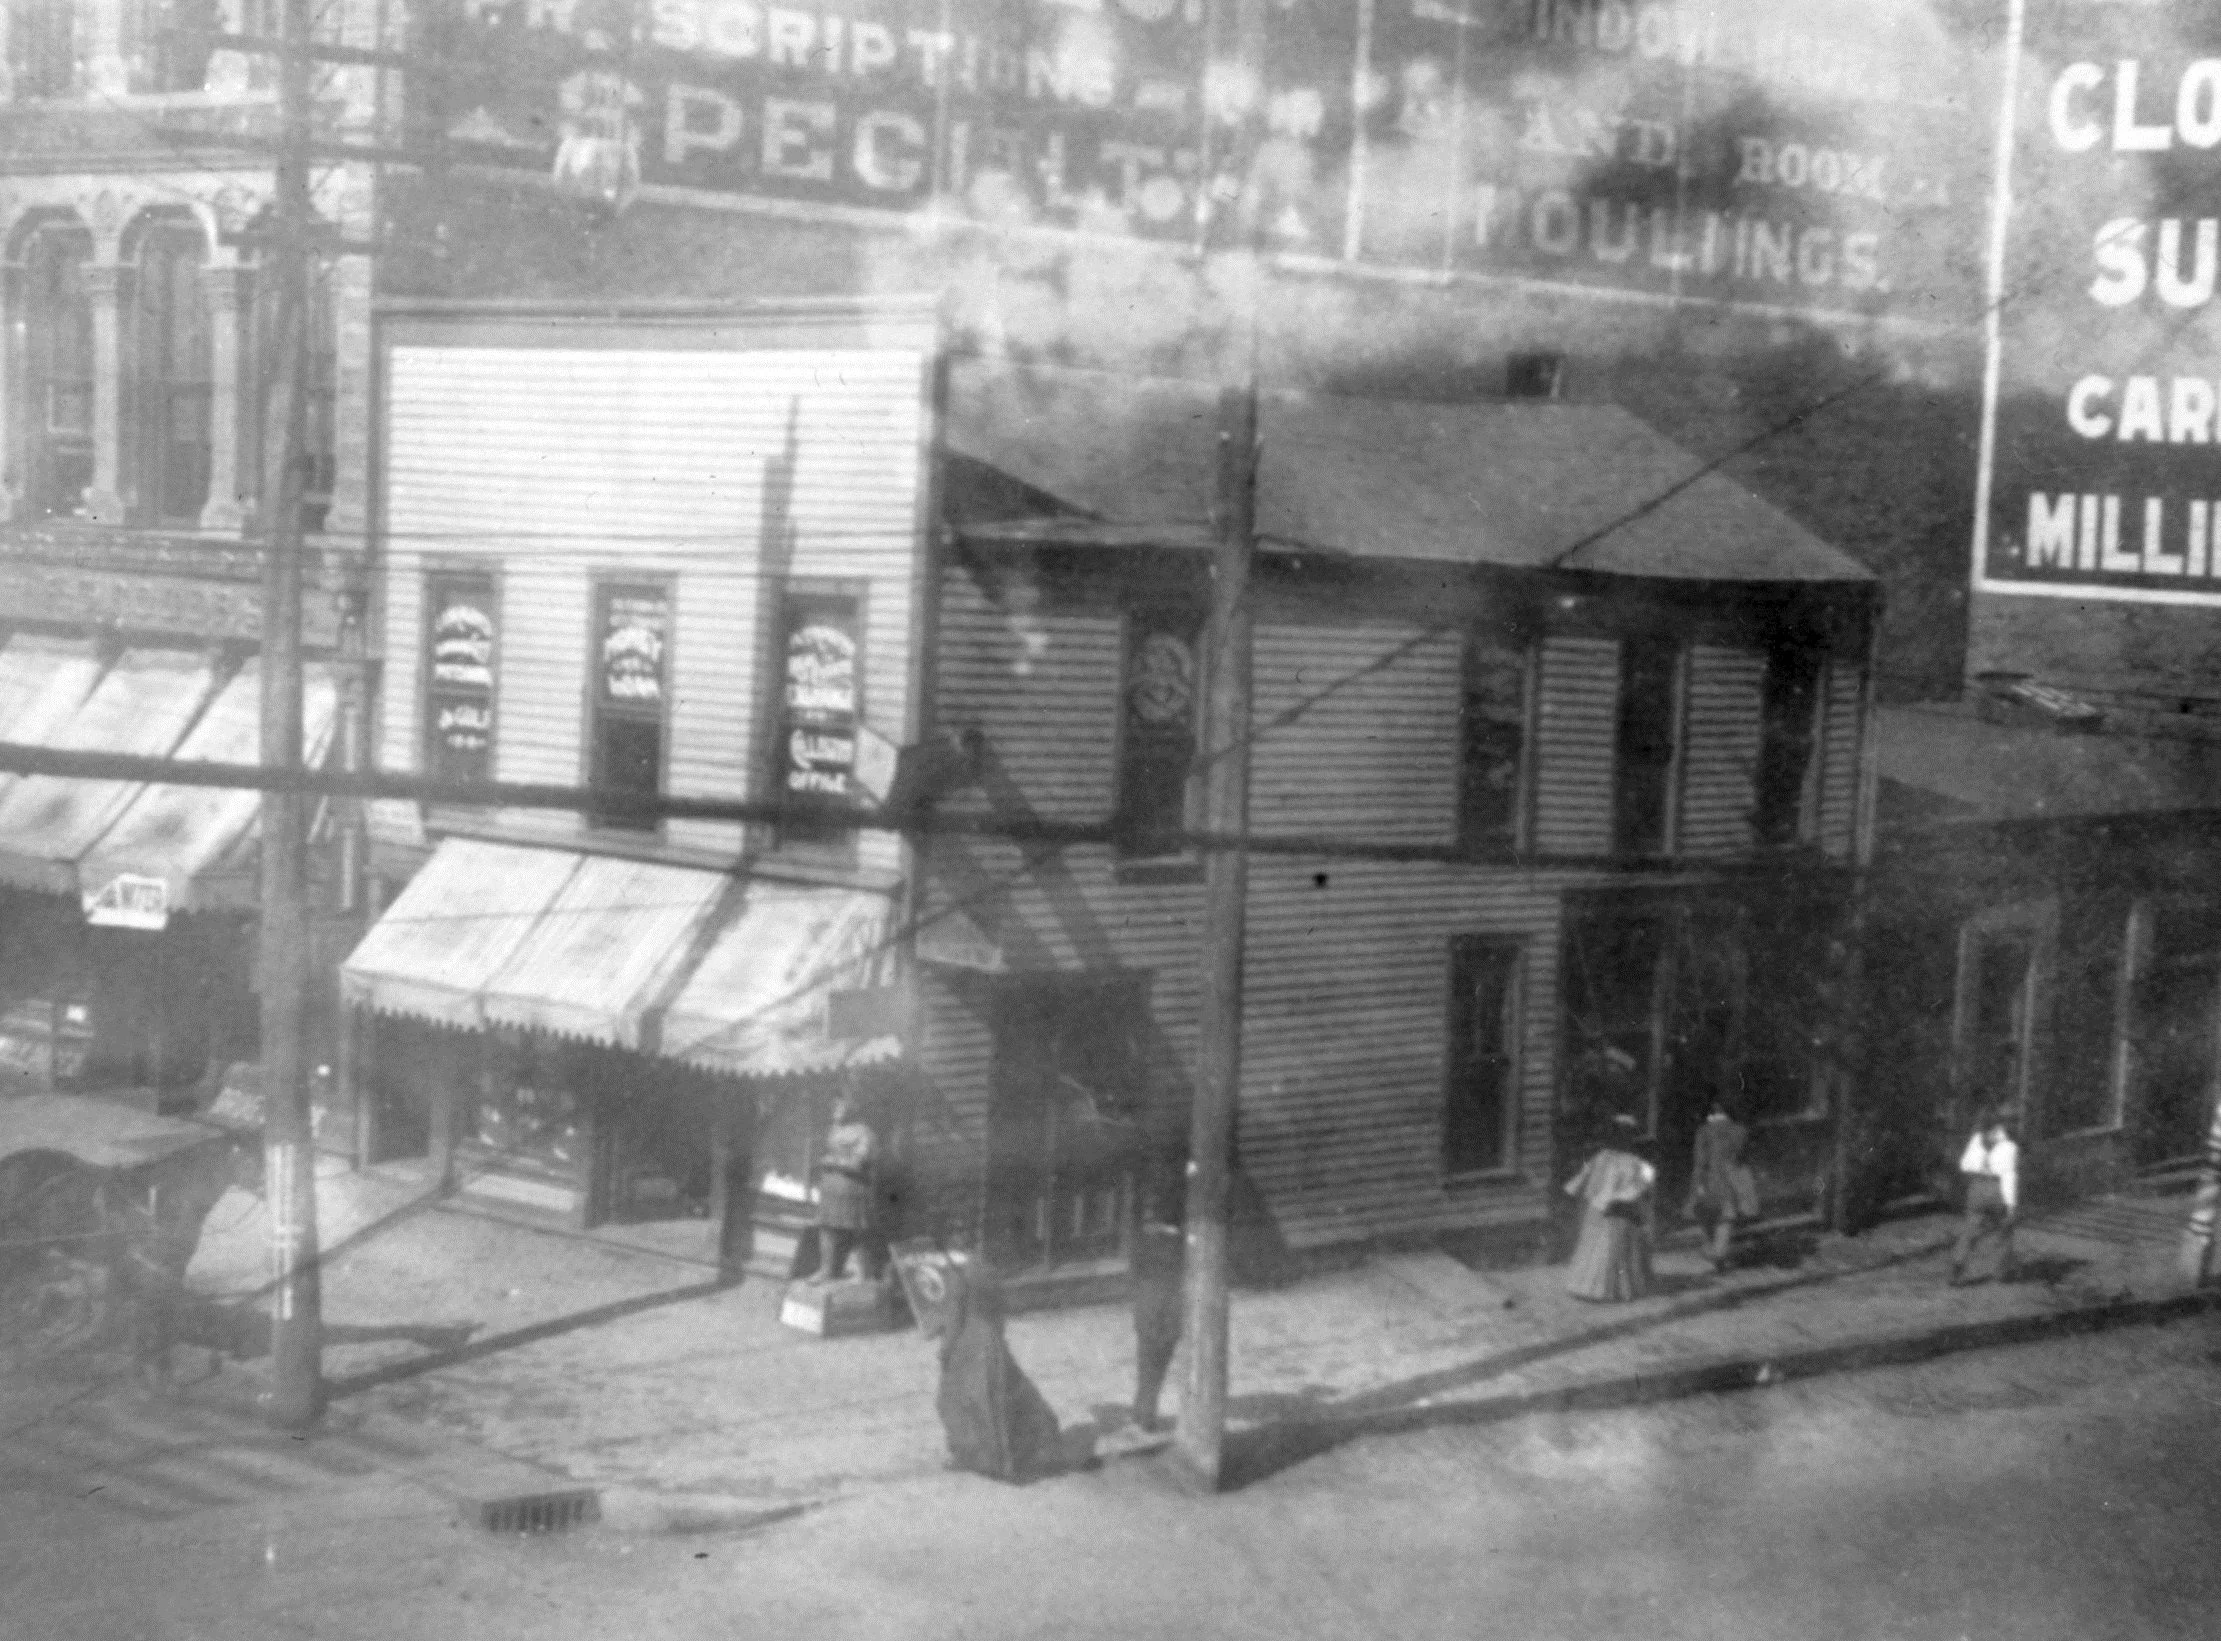 an elevated view of a street corner and building. Women in dresses walk down the sidewalk, a horse and buggy are parked on the street. Utility poles are in the foreground. Two larger brick buildings are behind the two-story frame building, each with large advertisements painted on them. The two story frame building has light colored siding, many windows, and awnings over the first story storefront.